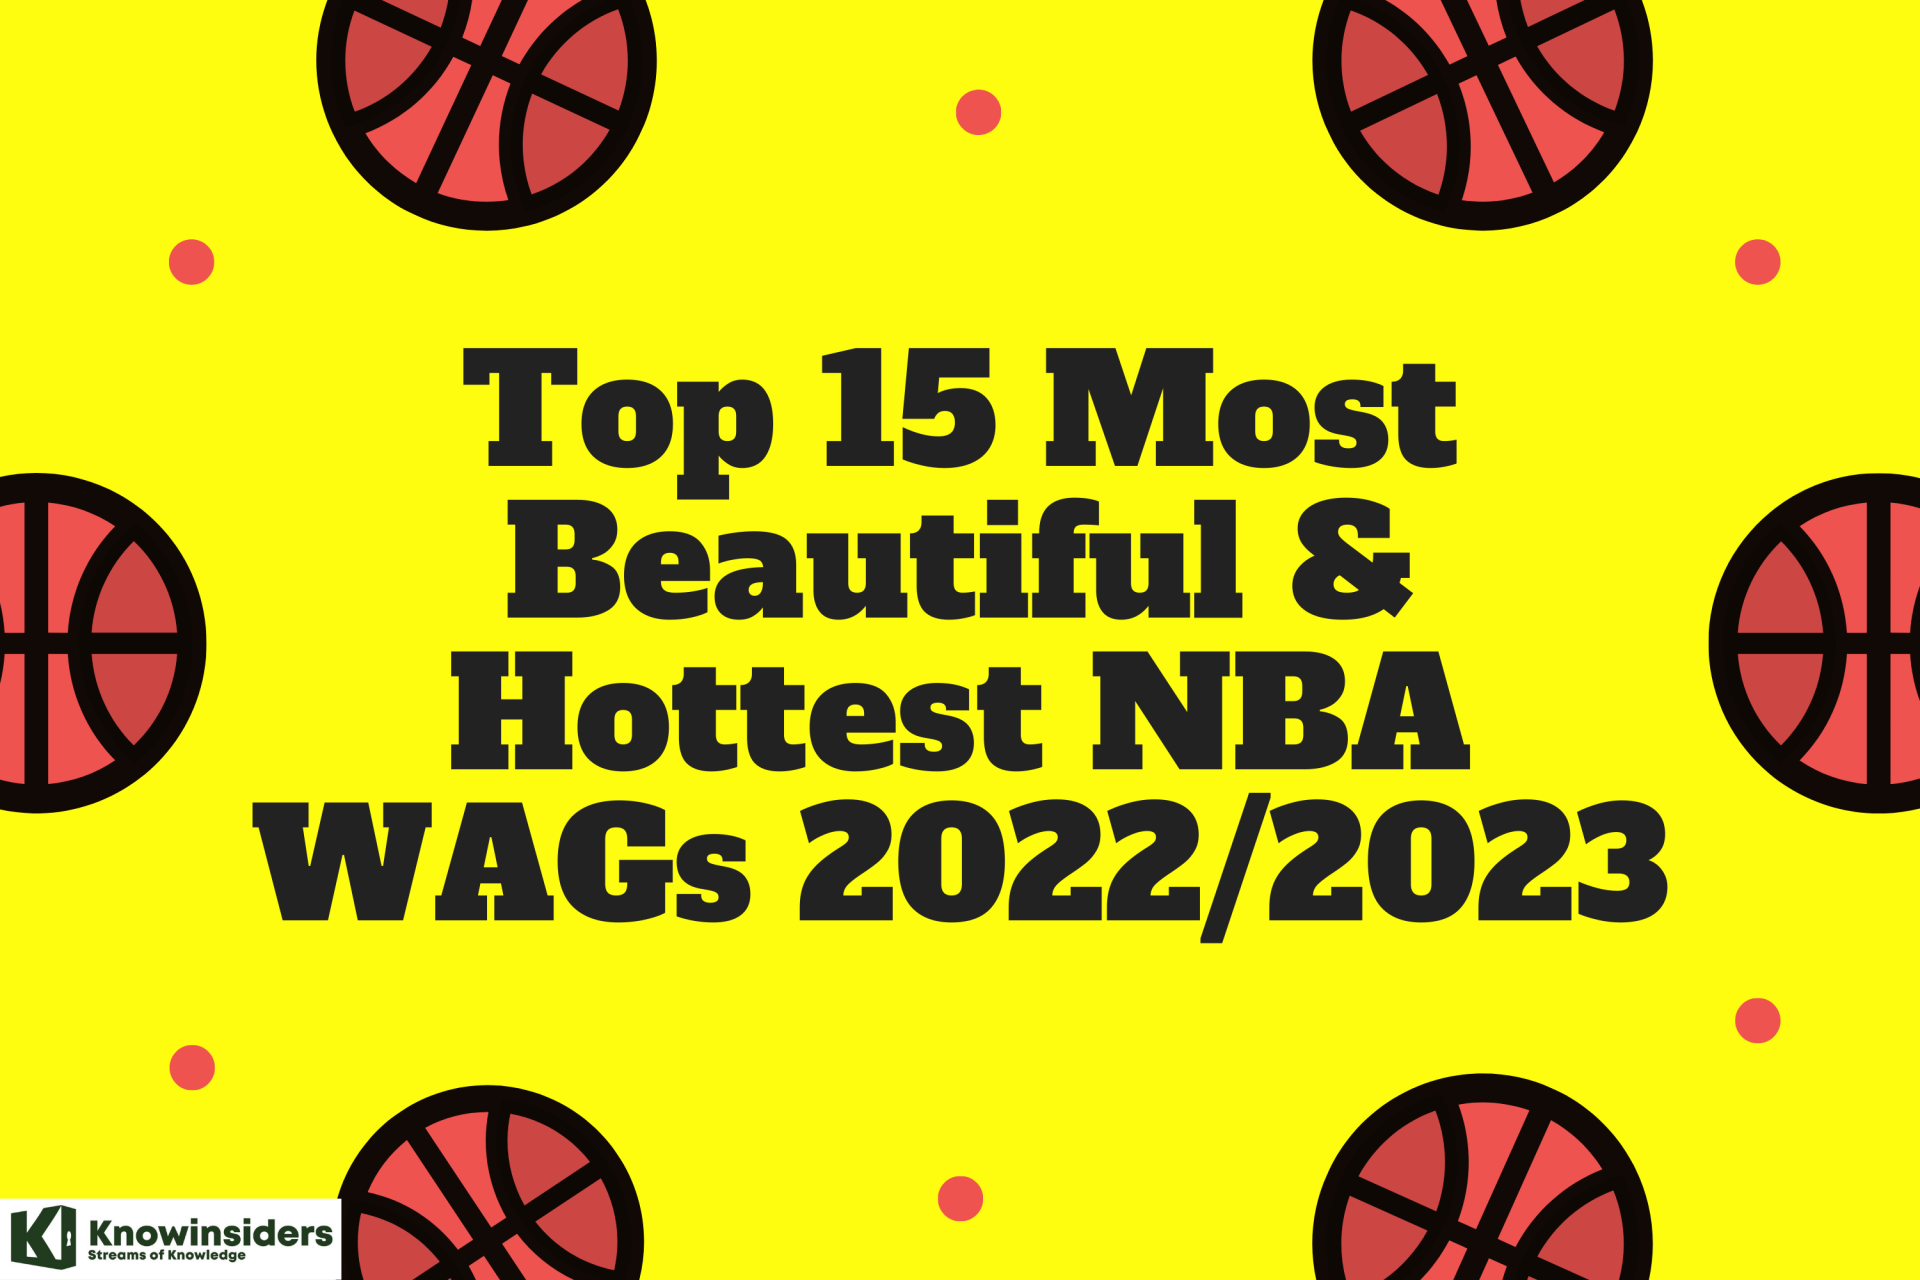 Top 15 Most Beautiful & Hottest NBA WAGs 2022/2023